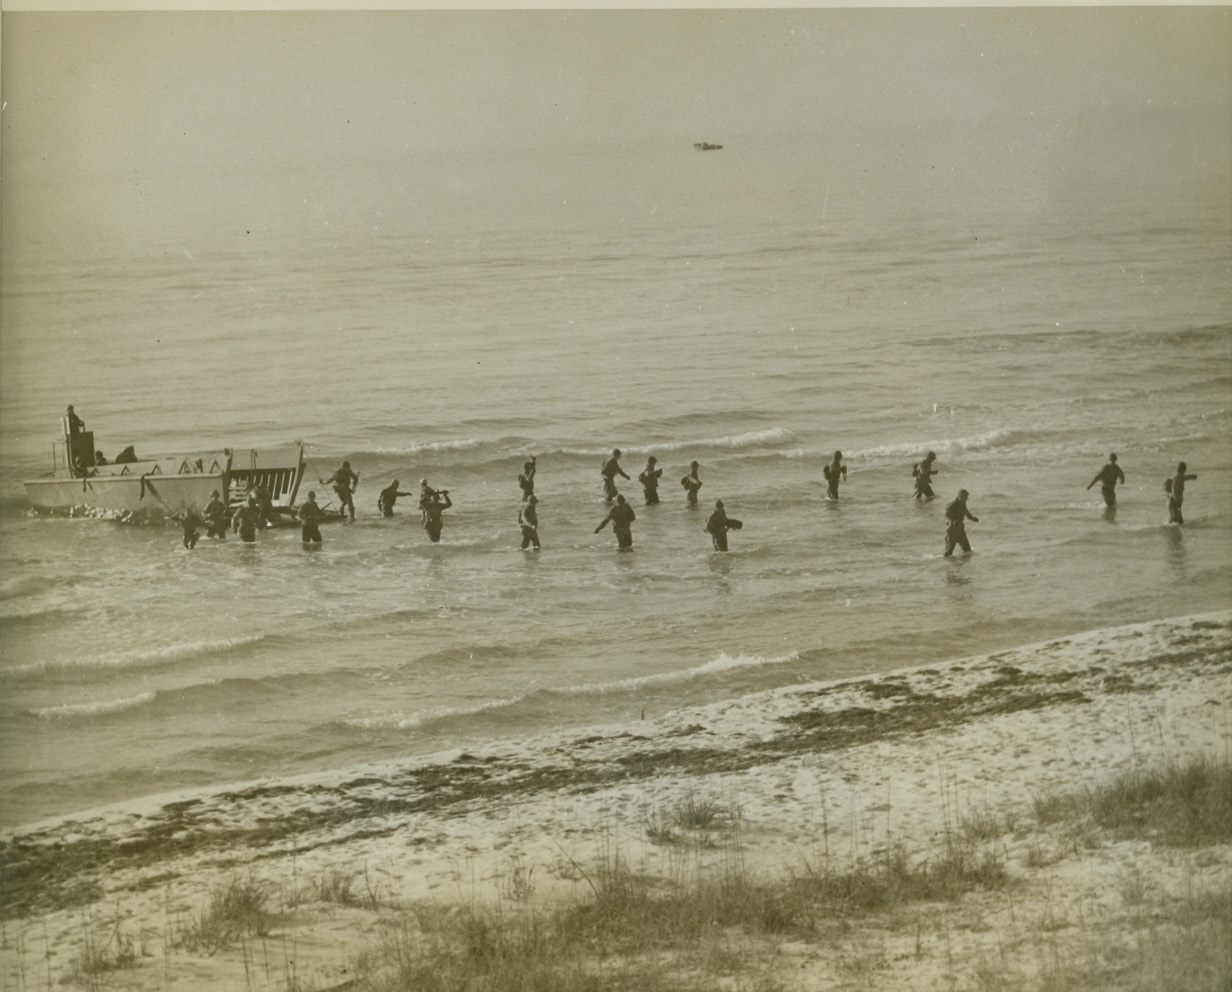 Amphibian Engineers Come Ashore (1), 12/20/1942. Camp Carrabelle, Fla.—Seagoing soldiers of the new Engineer Amphibian Command wade ashore from a landing boat during landing operations which were observed by Lieut. Gen. Leslie J. McNeir, chief of U.S. Army Ground Forces. The Engineer Amphibian Command is Uncle Sam’s latest in combat troops. Credit: ACME.;